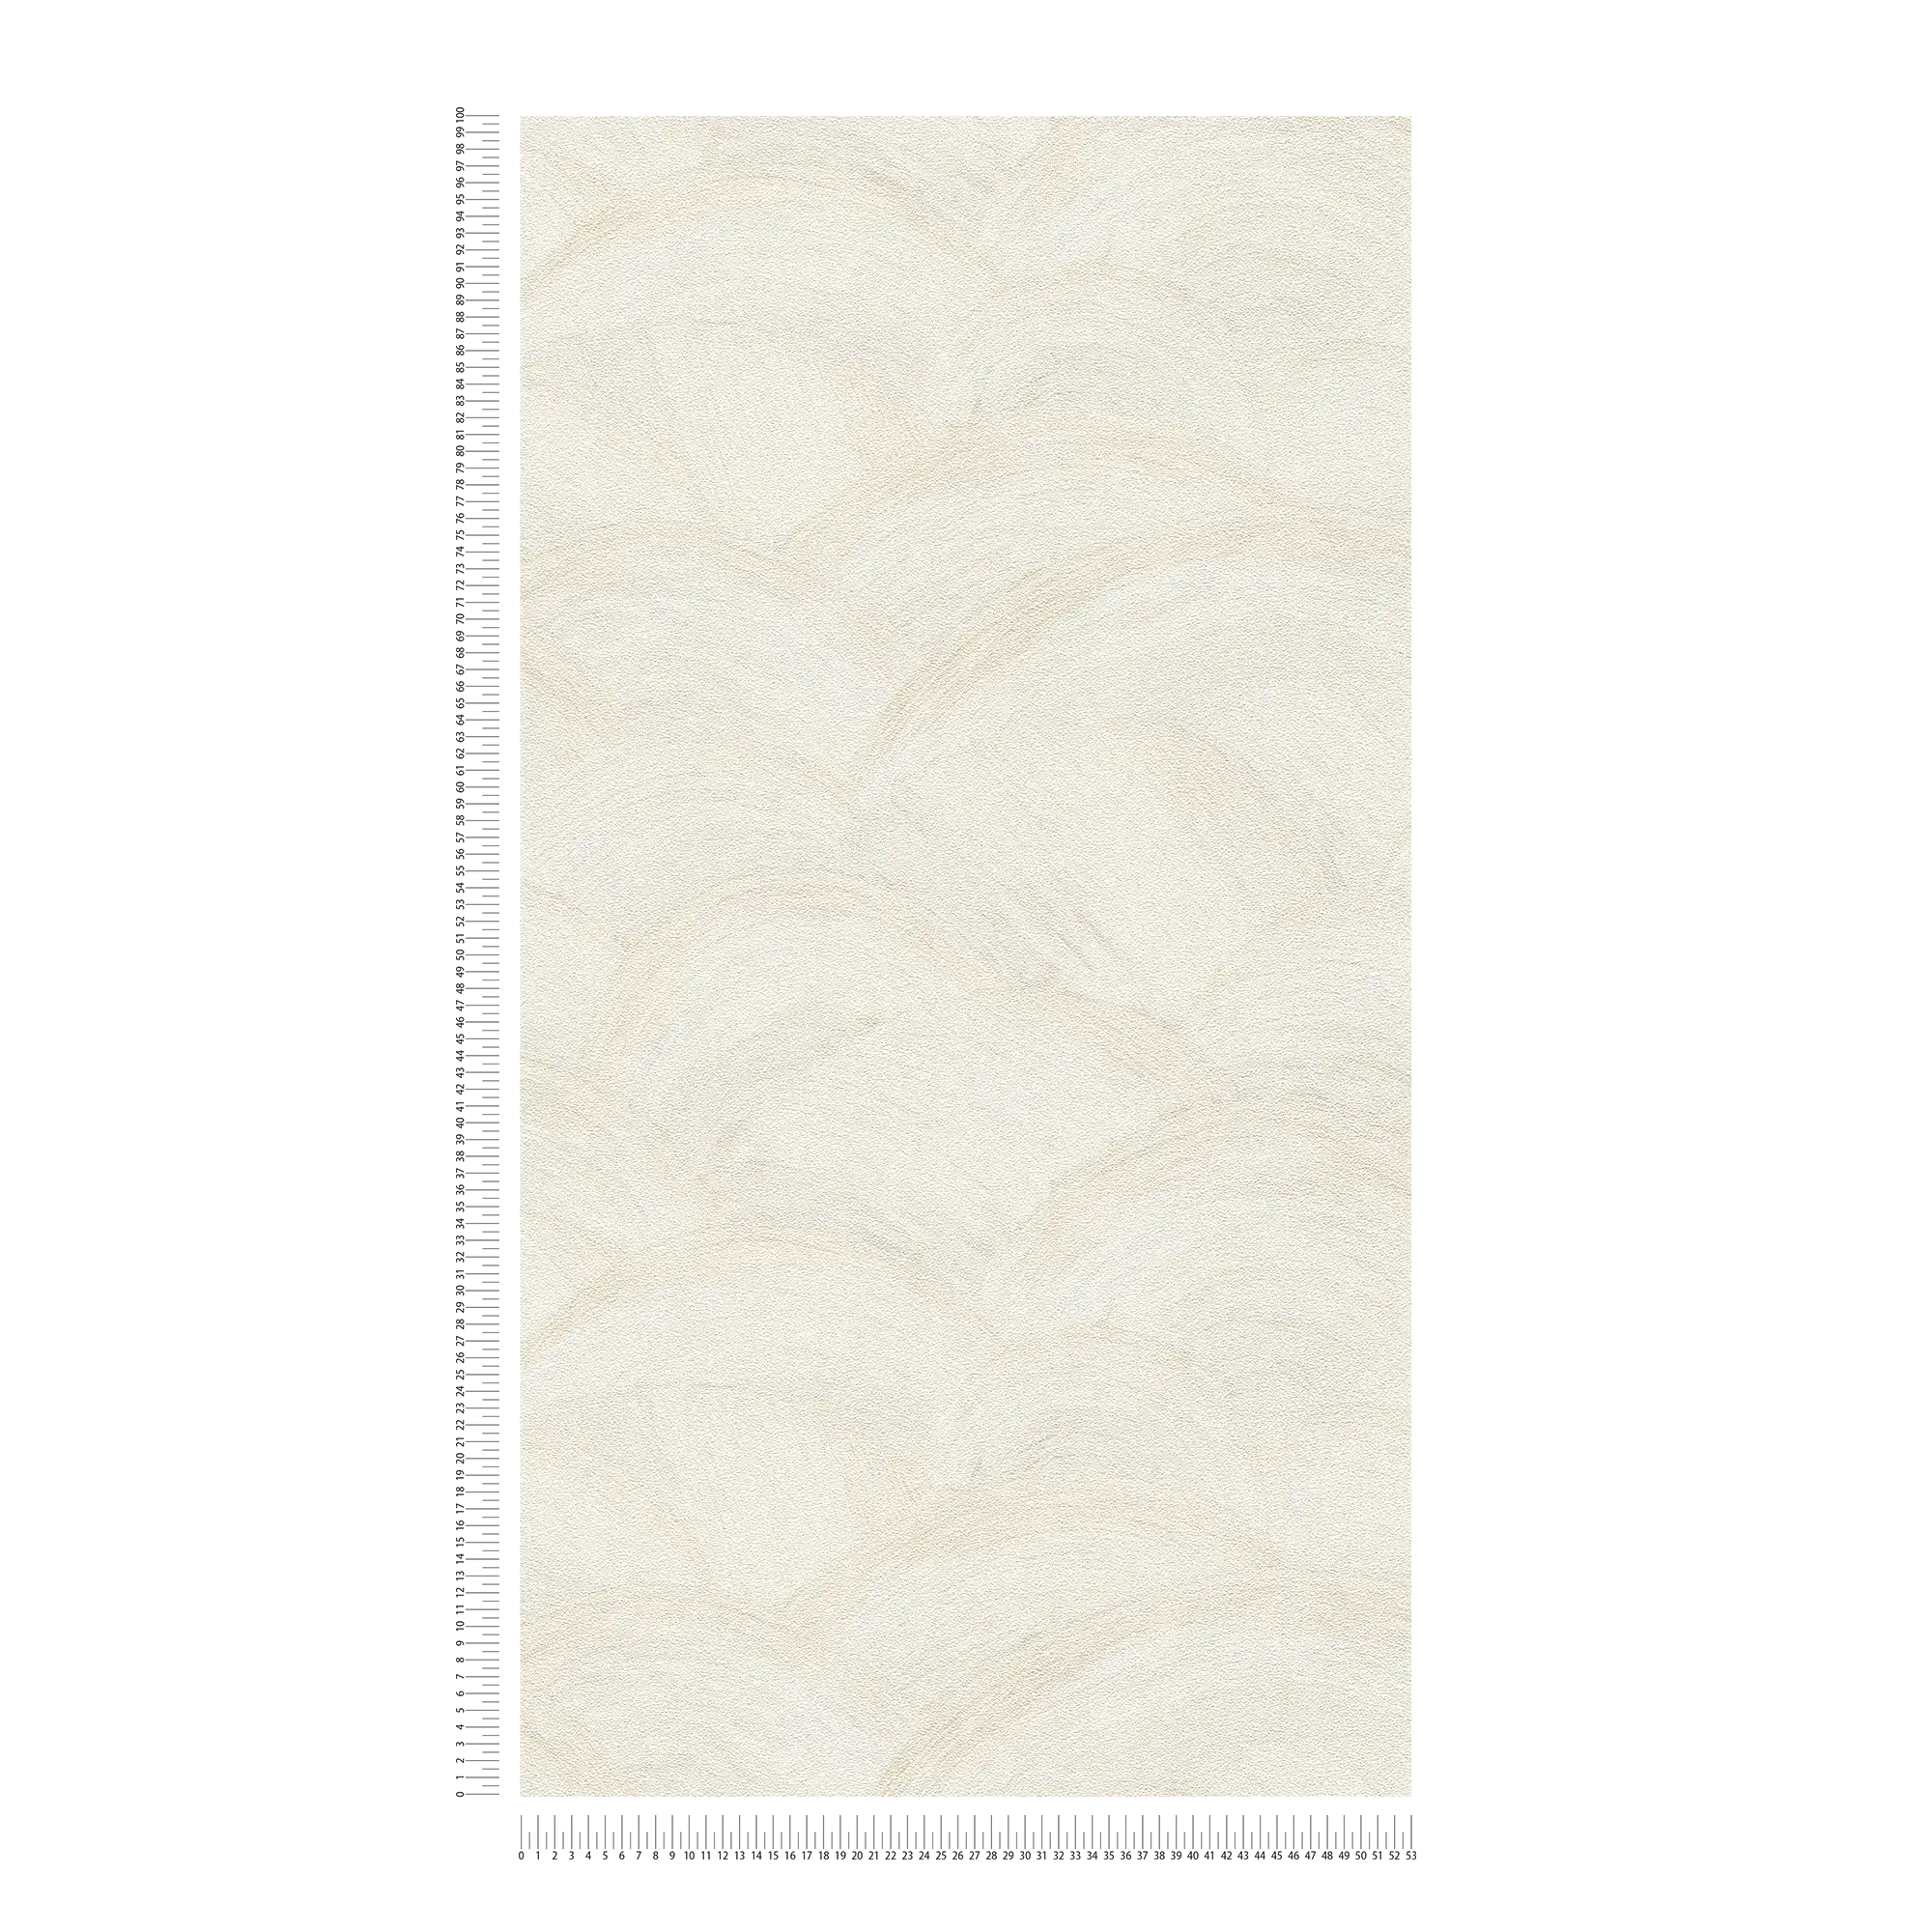             Non-woven wallpaper with subtle wave pattern - white, cream, grey
        